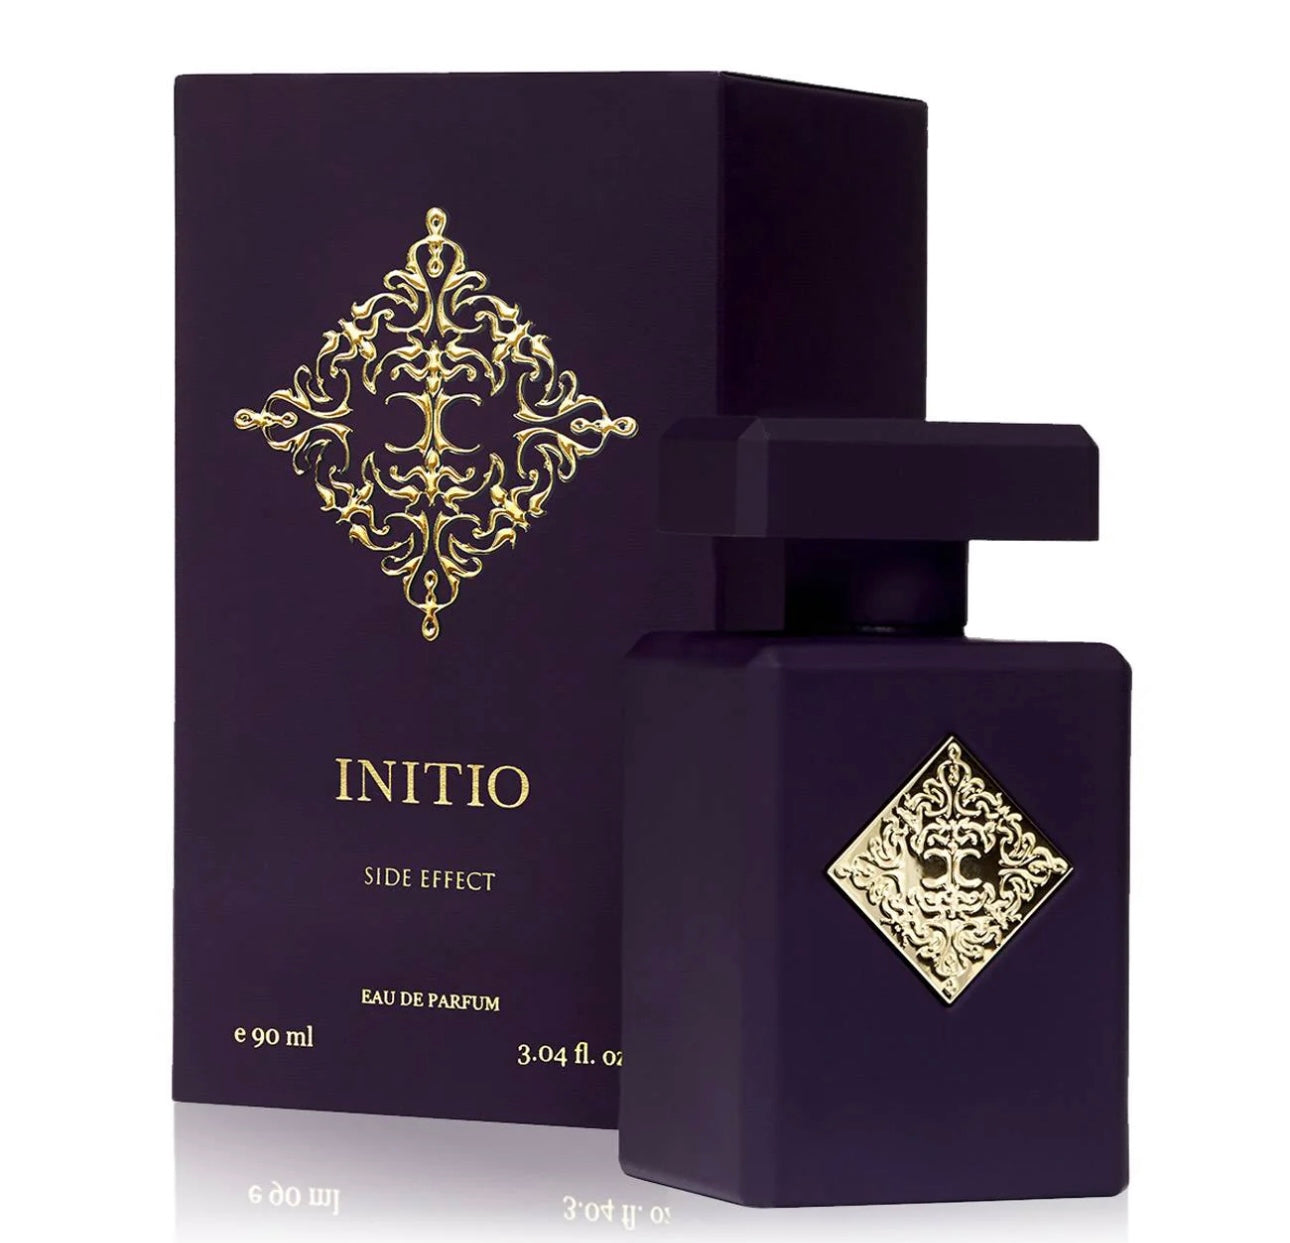 Initio-Side Effect-EdP